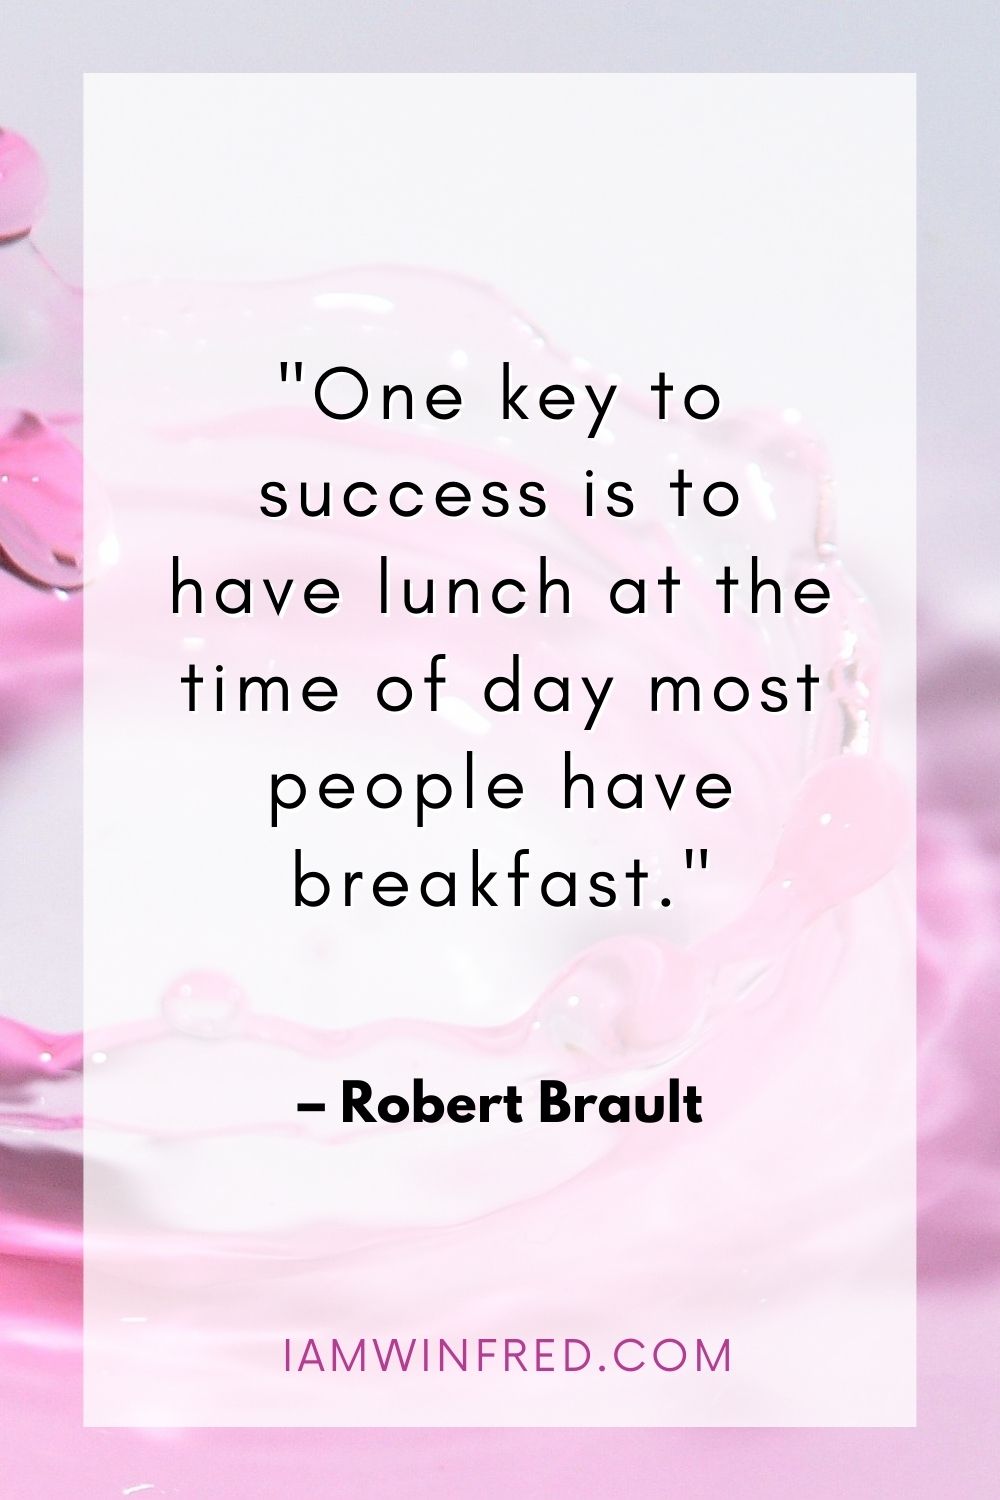 One Key To Success Is To Have Lunch At The Time Of Day Most People Have Breakfast.